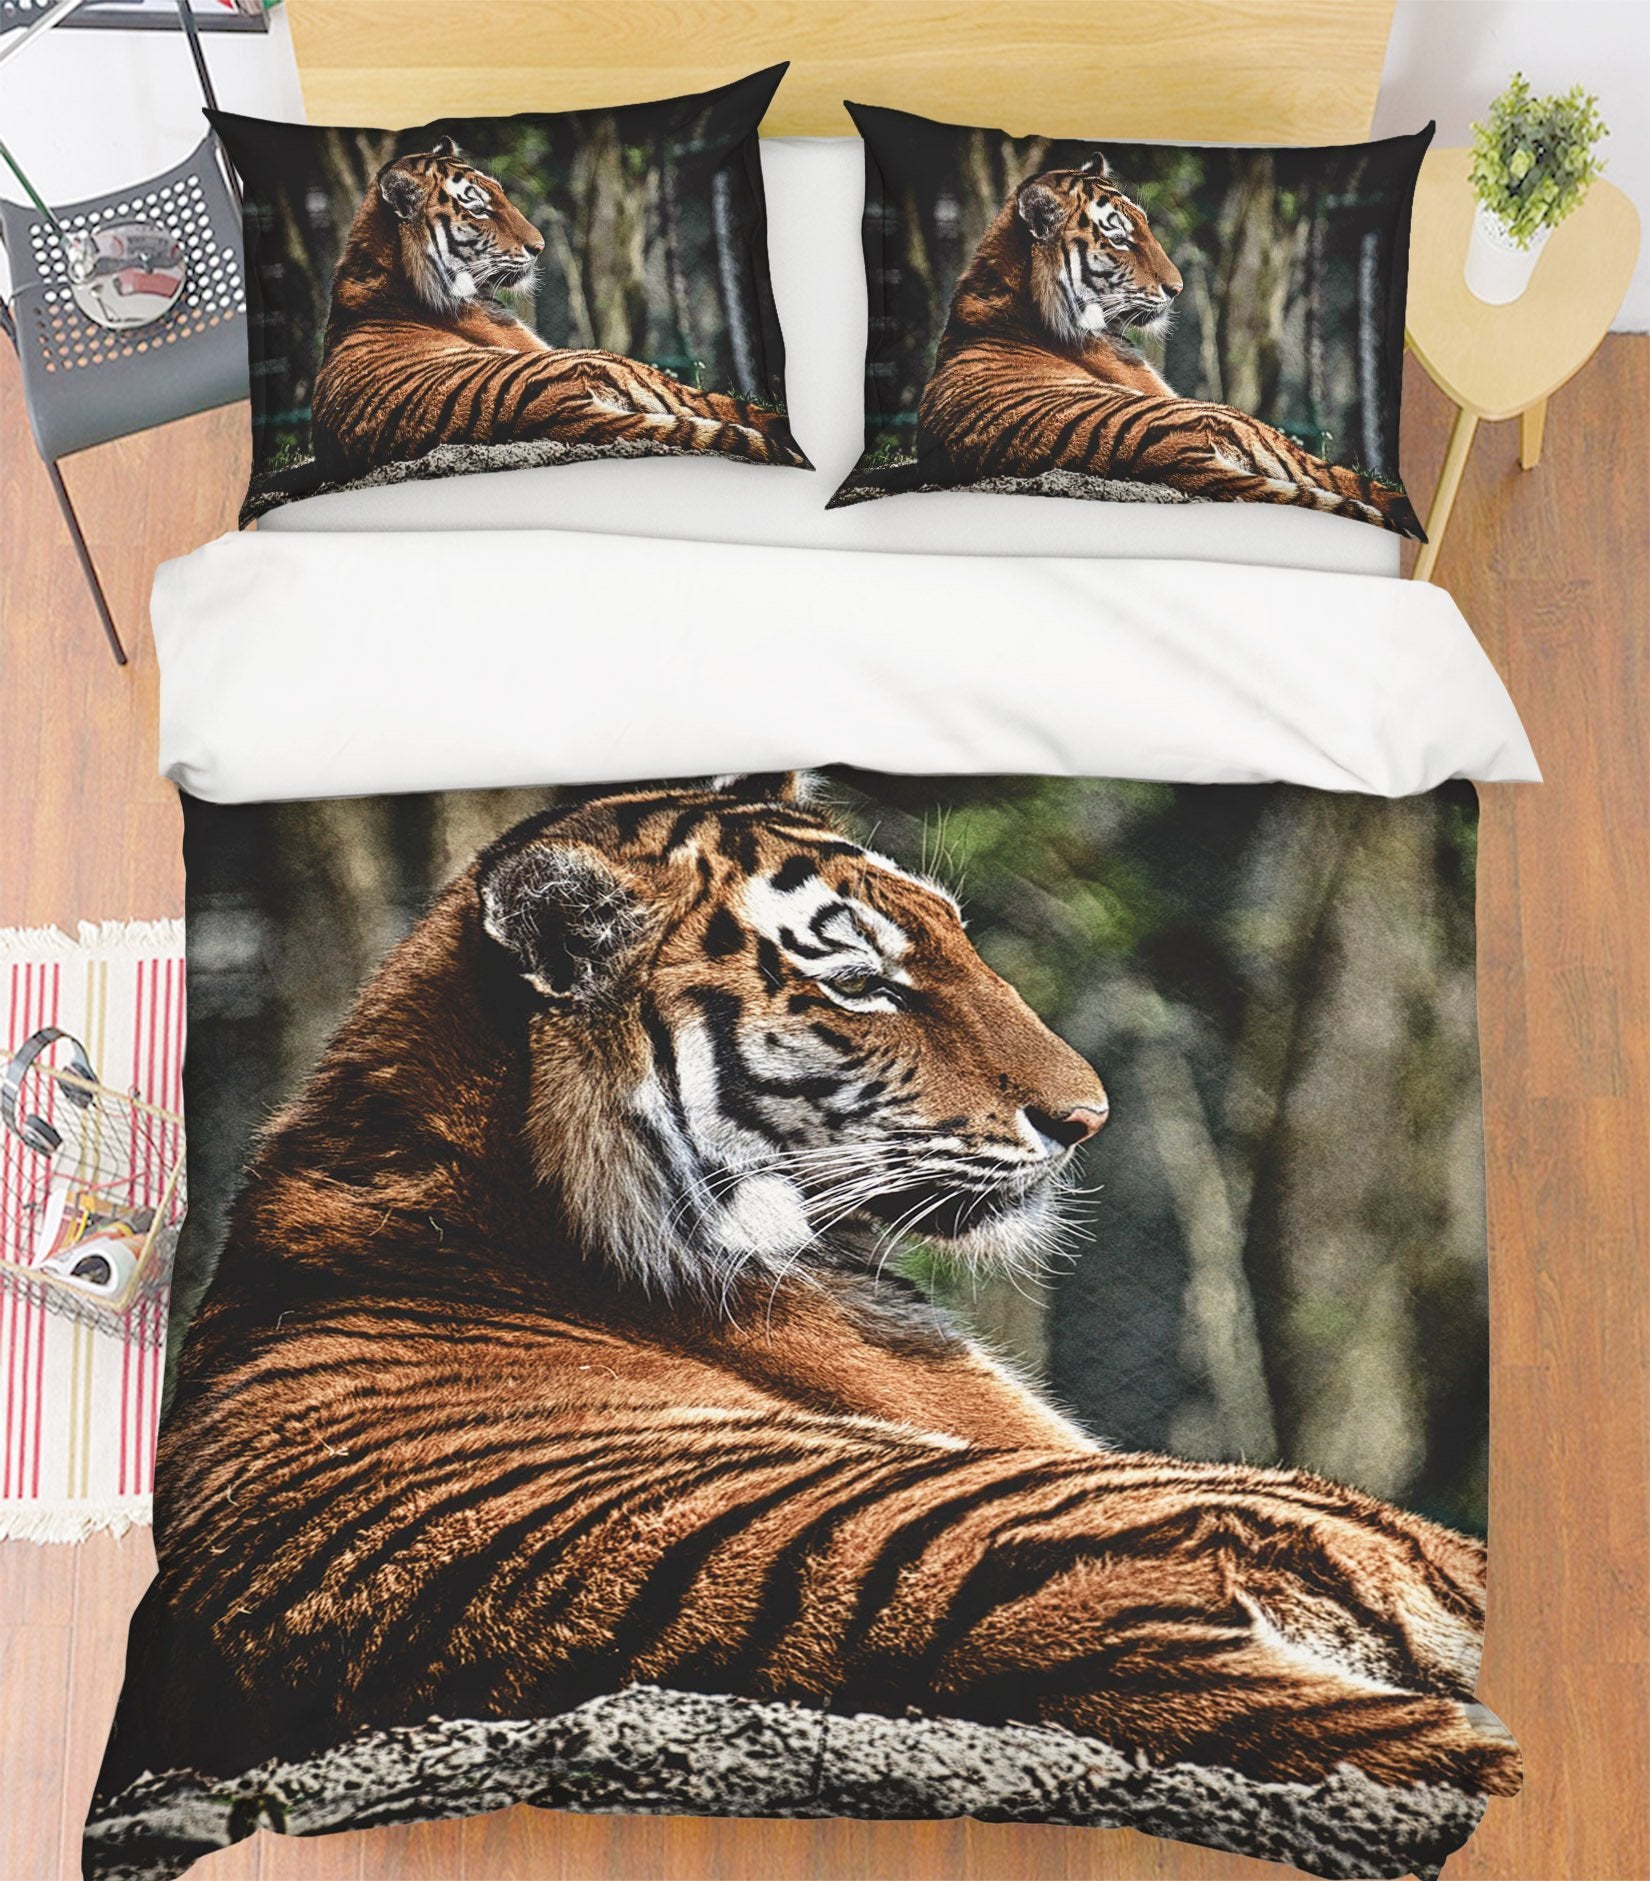 3D Tiger 2008 Bed Pillowcases Quilt Quiet Covers AJ Creativity Home 